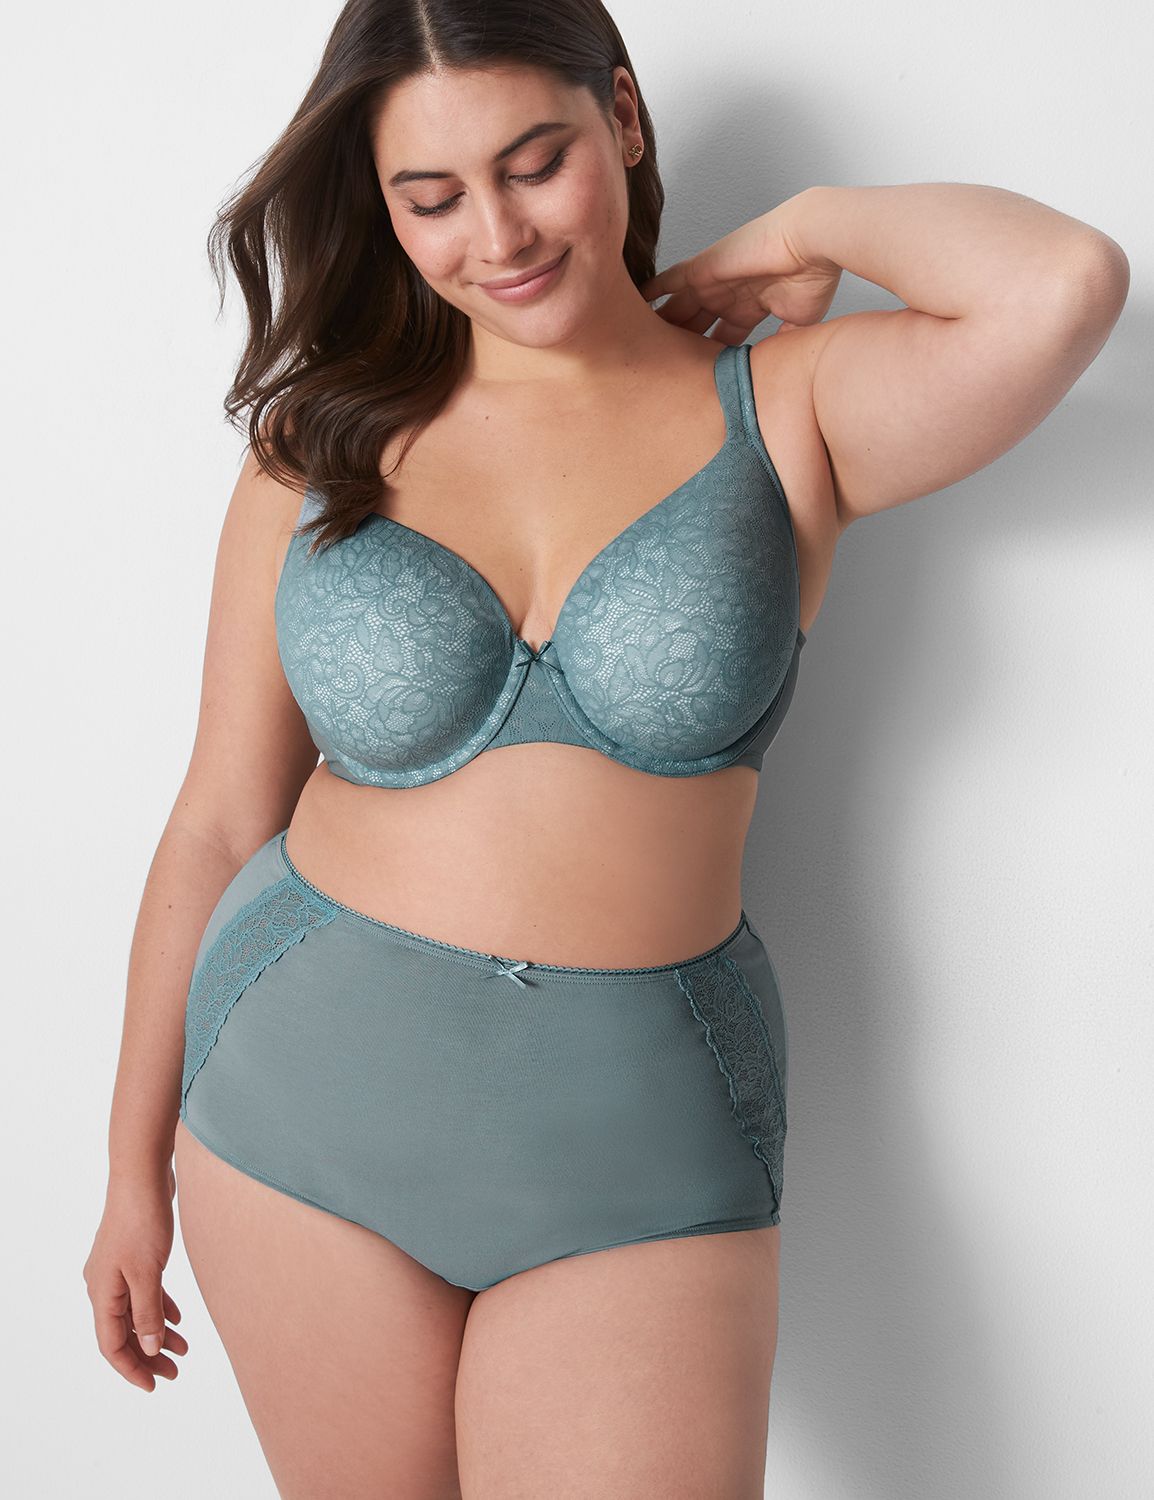 Lane Bryant - It's a good day for a bra #spree. All #Cacique bras are on  sale. In stores & online.